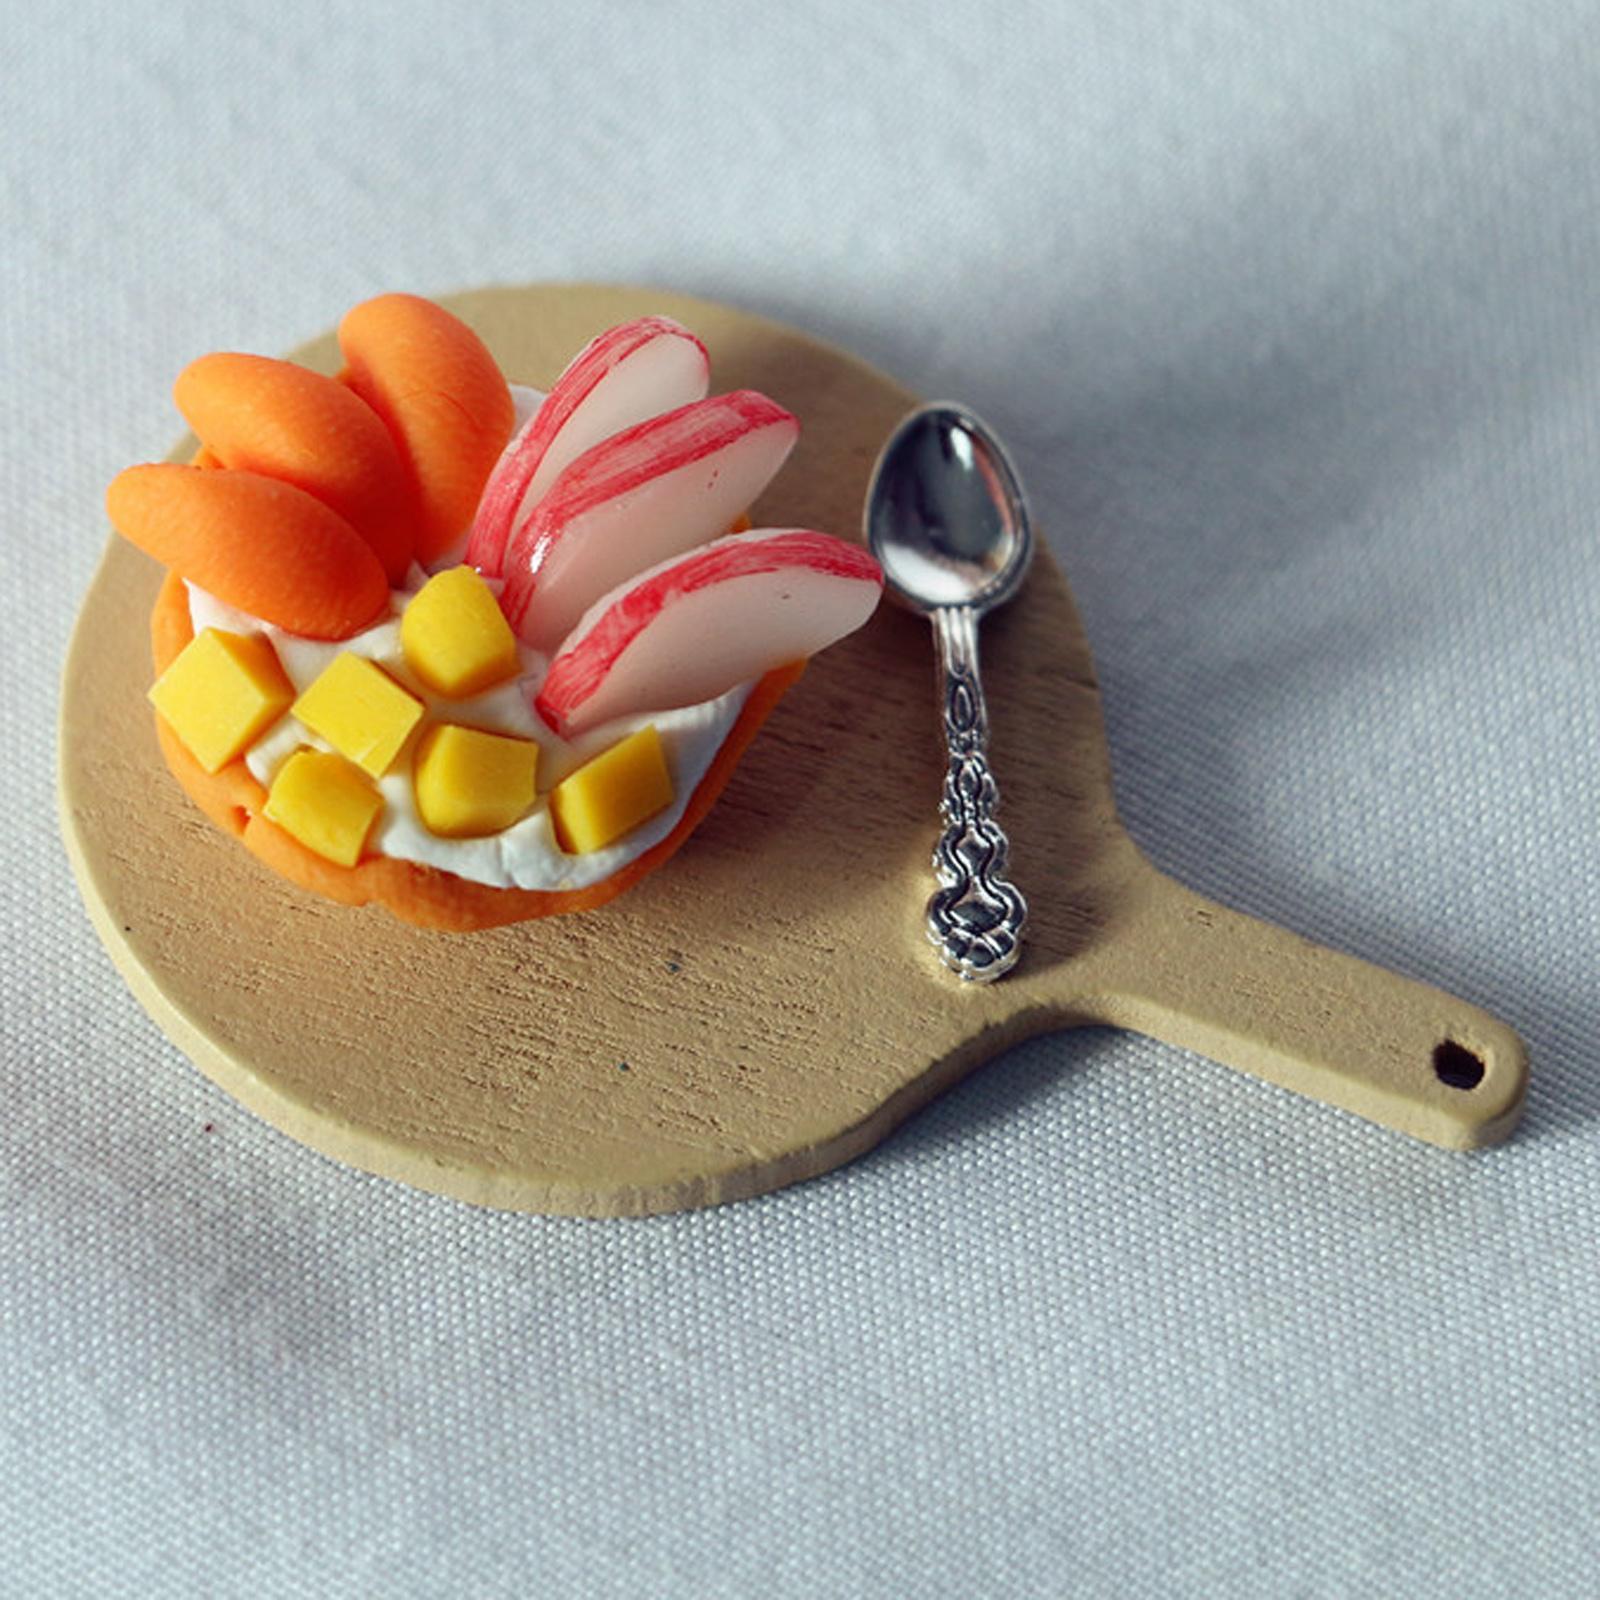 Miniature 1:12 Dollhouse Food Set Spoon with Tray Tiny Food for Pretend Play